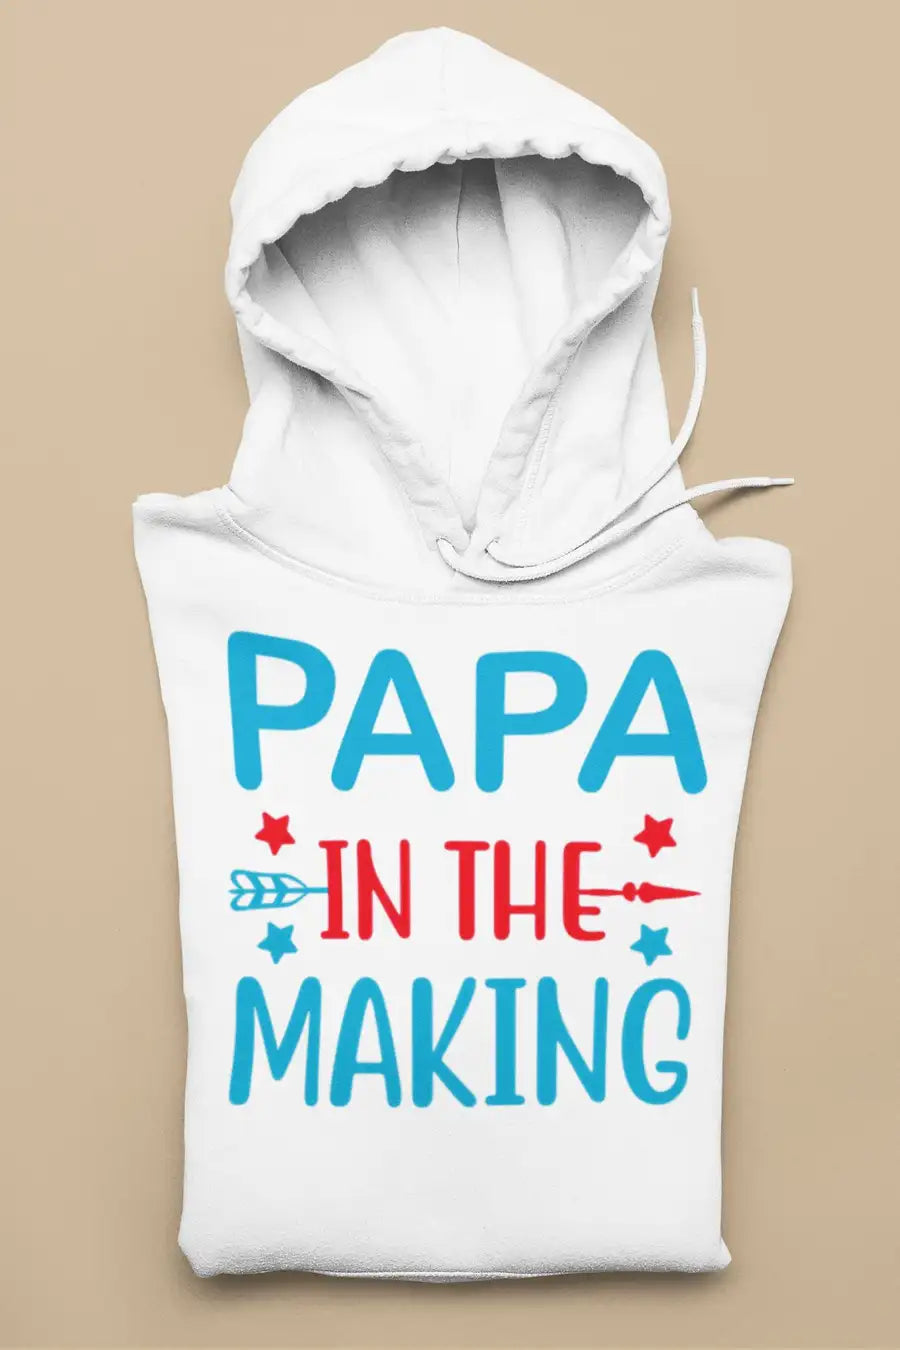 Papa in the Making Exclusive Hoodie for Men | Premium Design | Catch My Drift India - Catch My Drift India  dad, father, hoodie, hoodies, jacket, parents, trending, winter